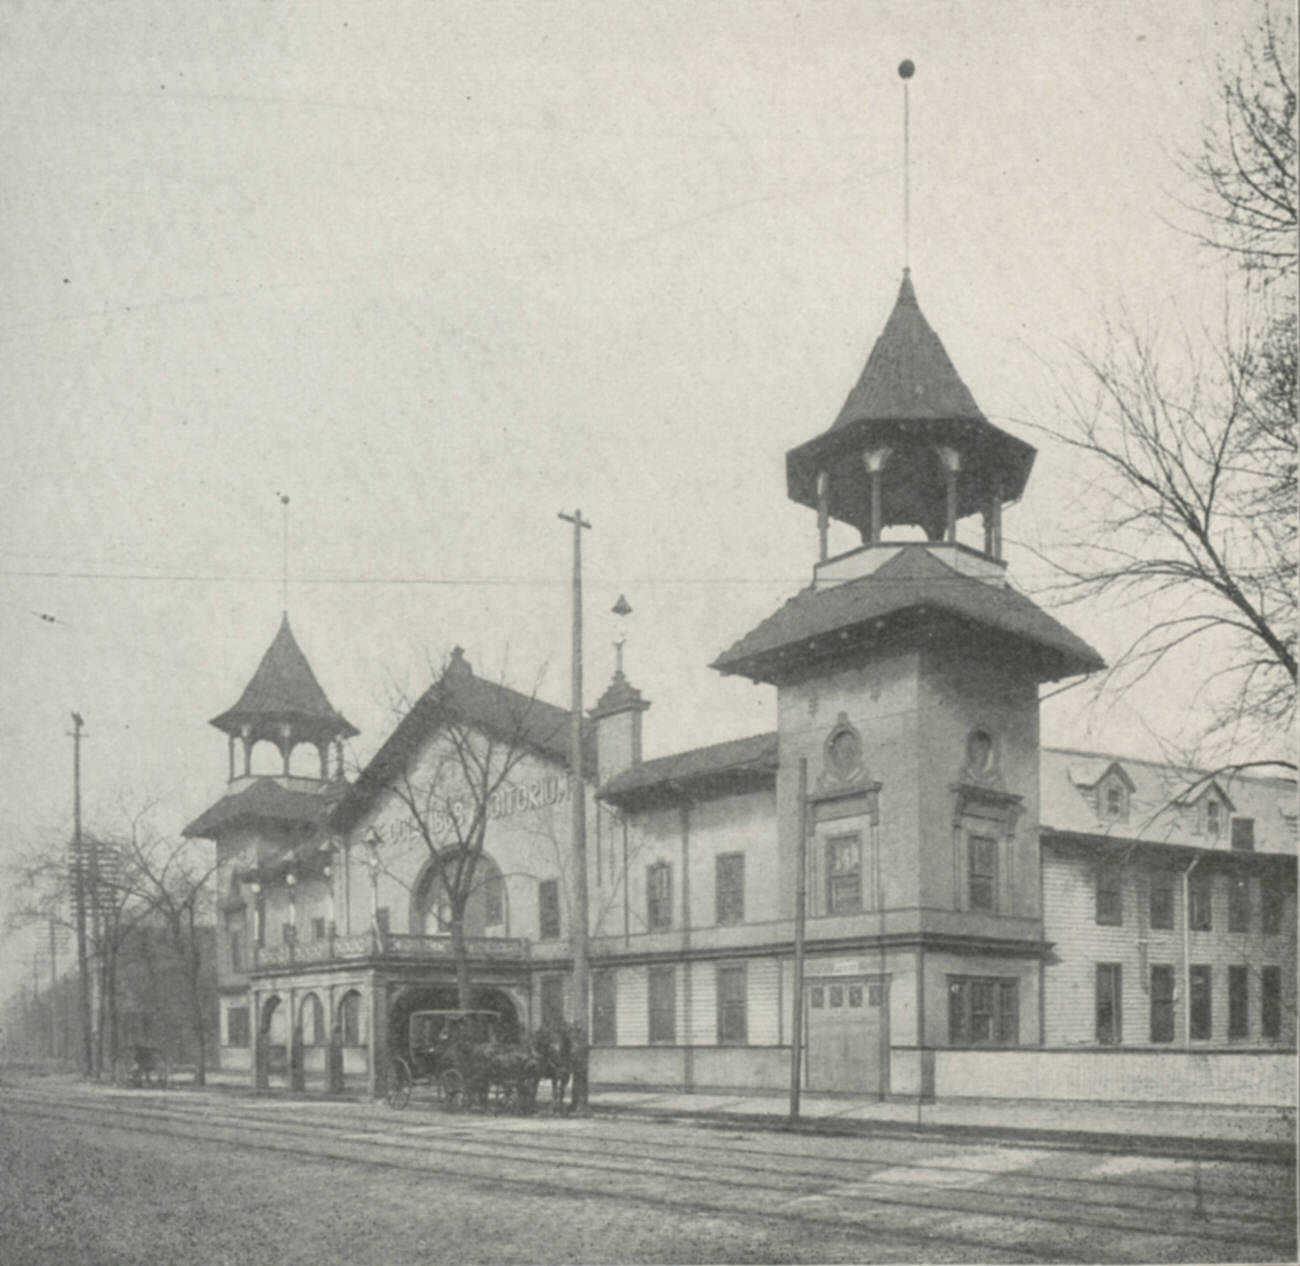 Columbus Auditorium, opened June 24, 1897, collapsed under snow load on February 18, 1910, originally Park Roller Skating Rink in 1885, remodeled to auditorium by Yost and Packard, 1890s